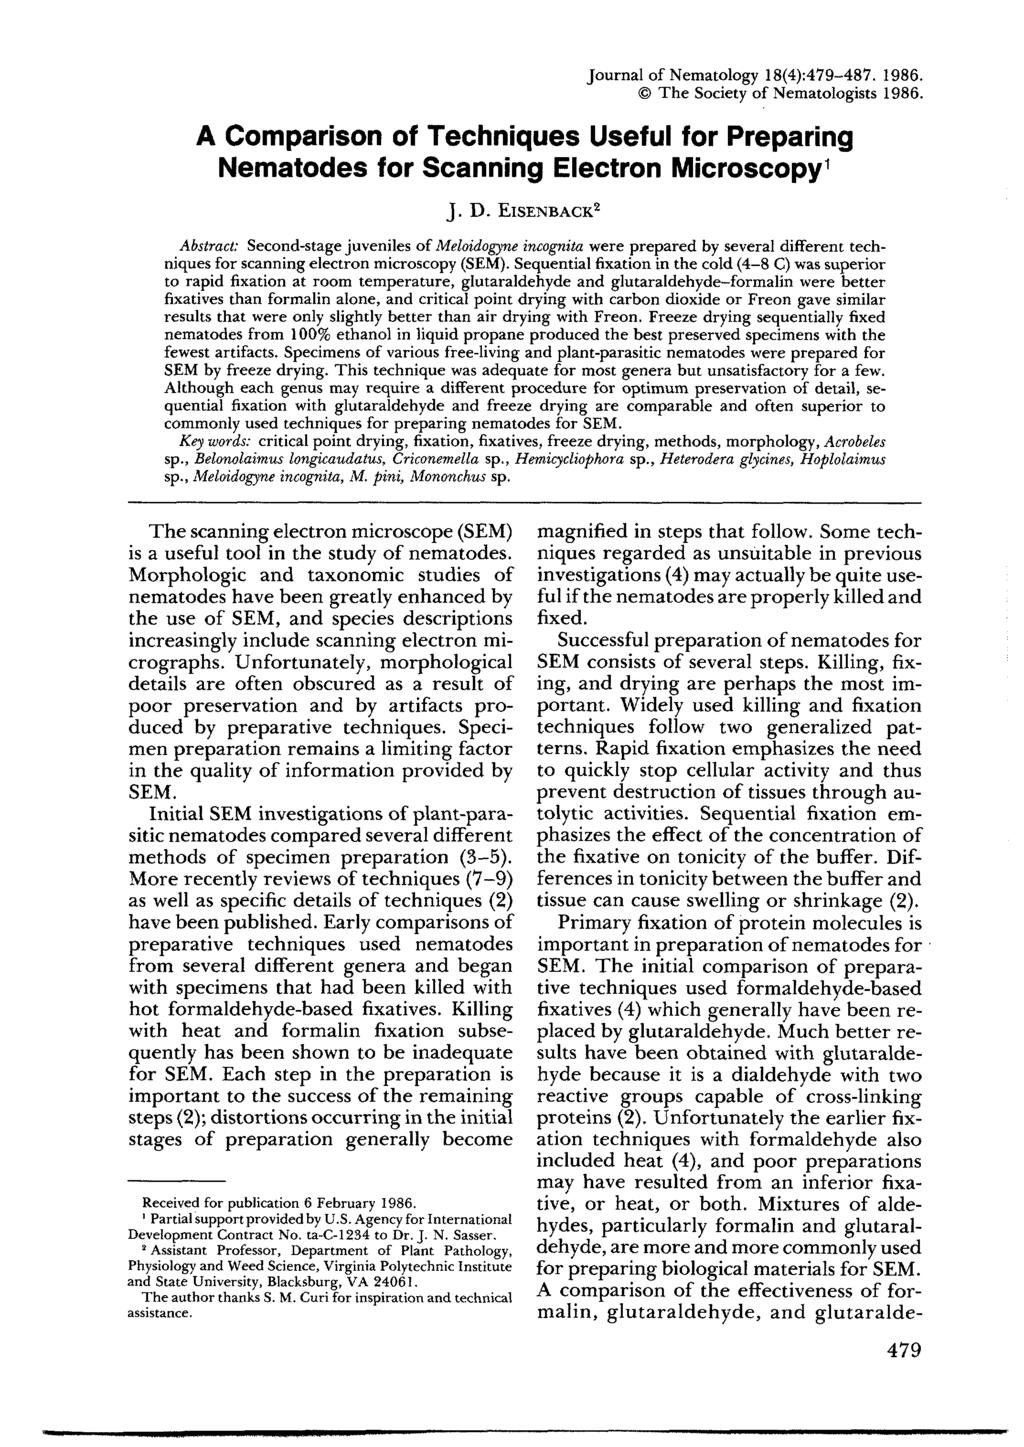 Journal of Nematology 18(4):479-487. 1986. The Society of Nematologists 1986. A Comparison of Techniques Useful for Preparing Nematodes for Scanning Electron Microscopy 1 J. D.